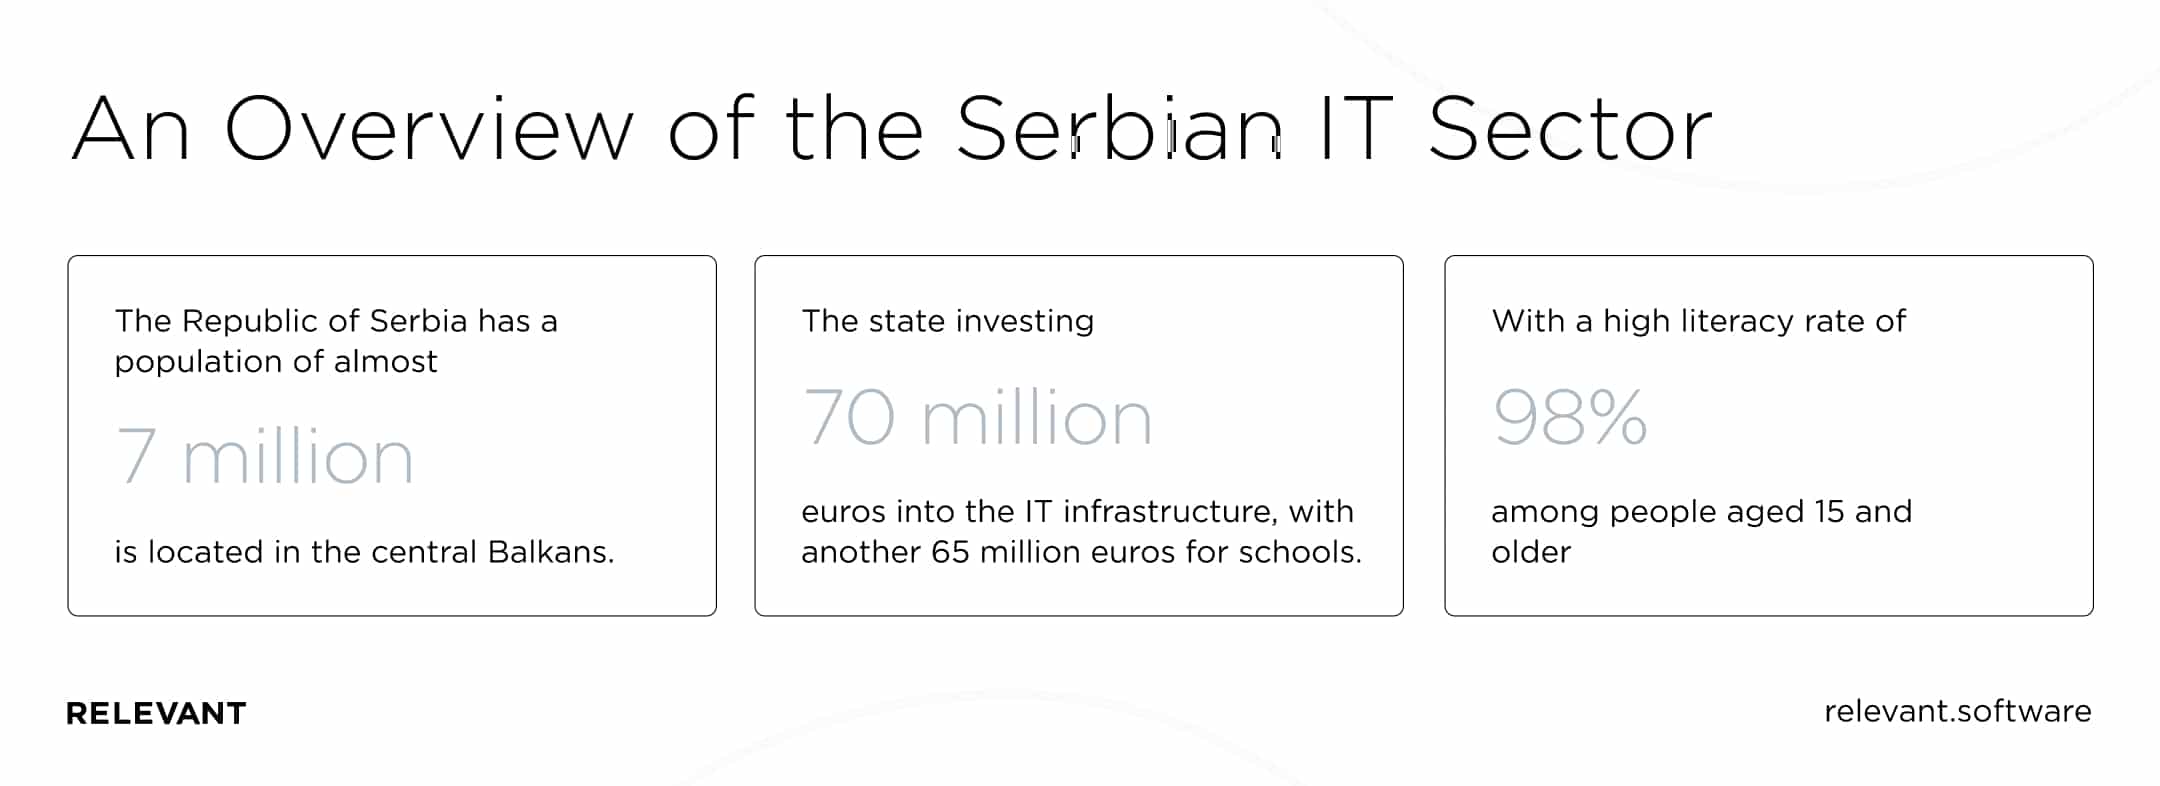 IT sector in Serbia overview